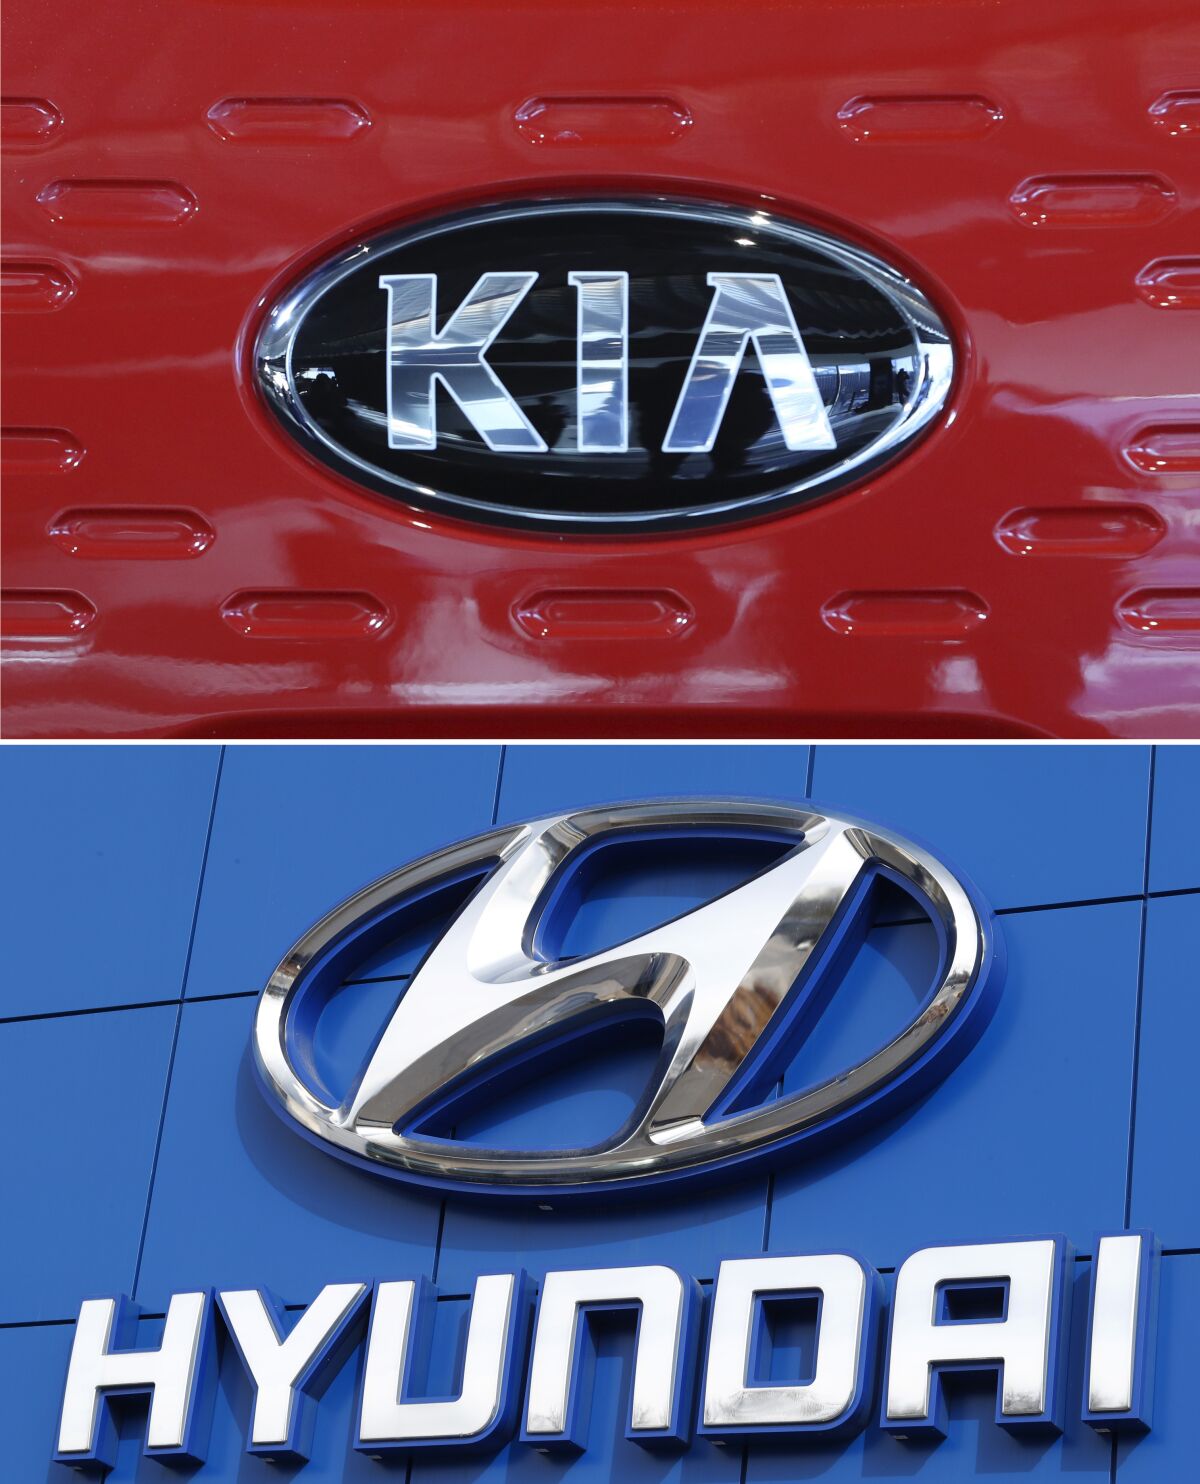 FILE- This combination of file photos shows the logo of Kia Motors during an unveiling ceremony on Dec. 13, 2017, in Seoul, South Korea, top, and a Hyundai logo on the side of a showroom on April 15, 2018, in the south Denver suburb of Littleton, Colo., bottom. The Korean automakers are recalling over 591,000 vehicles in the U.S. to fix a brake fluid leak that could cause engine fires. (AP Photo, File)